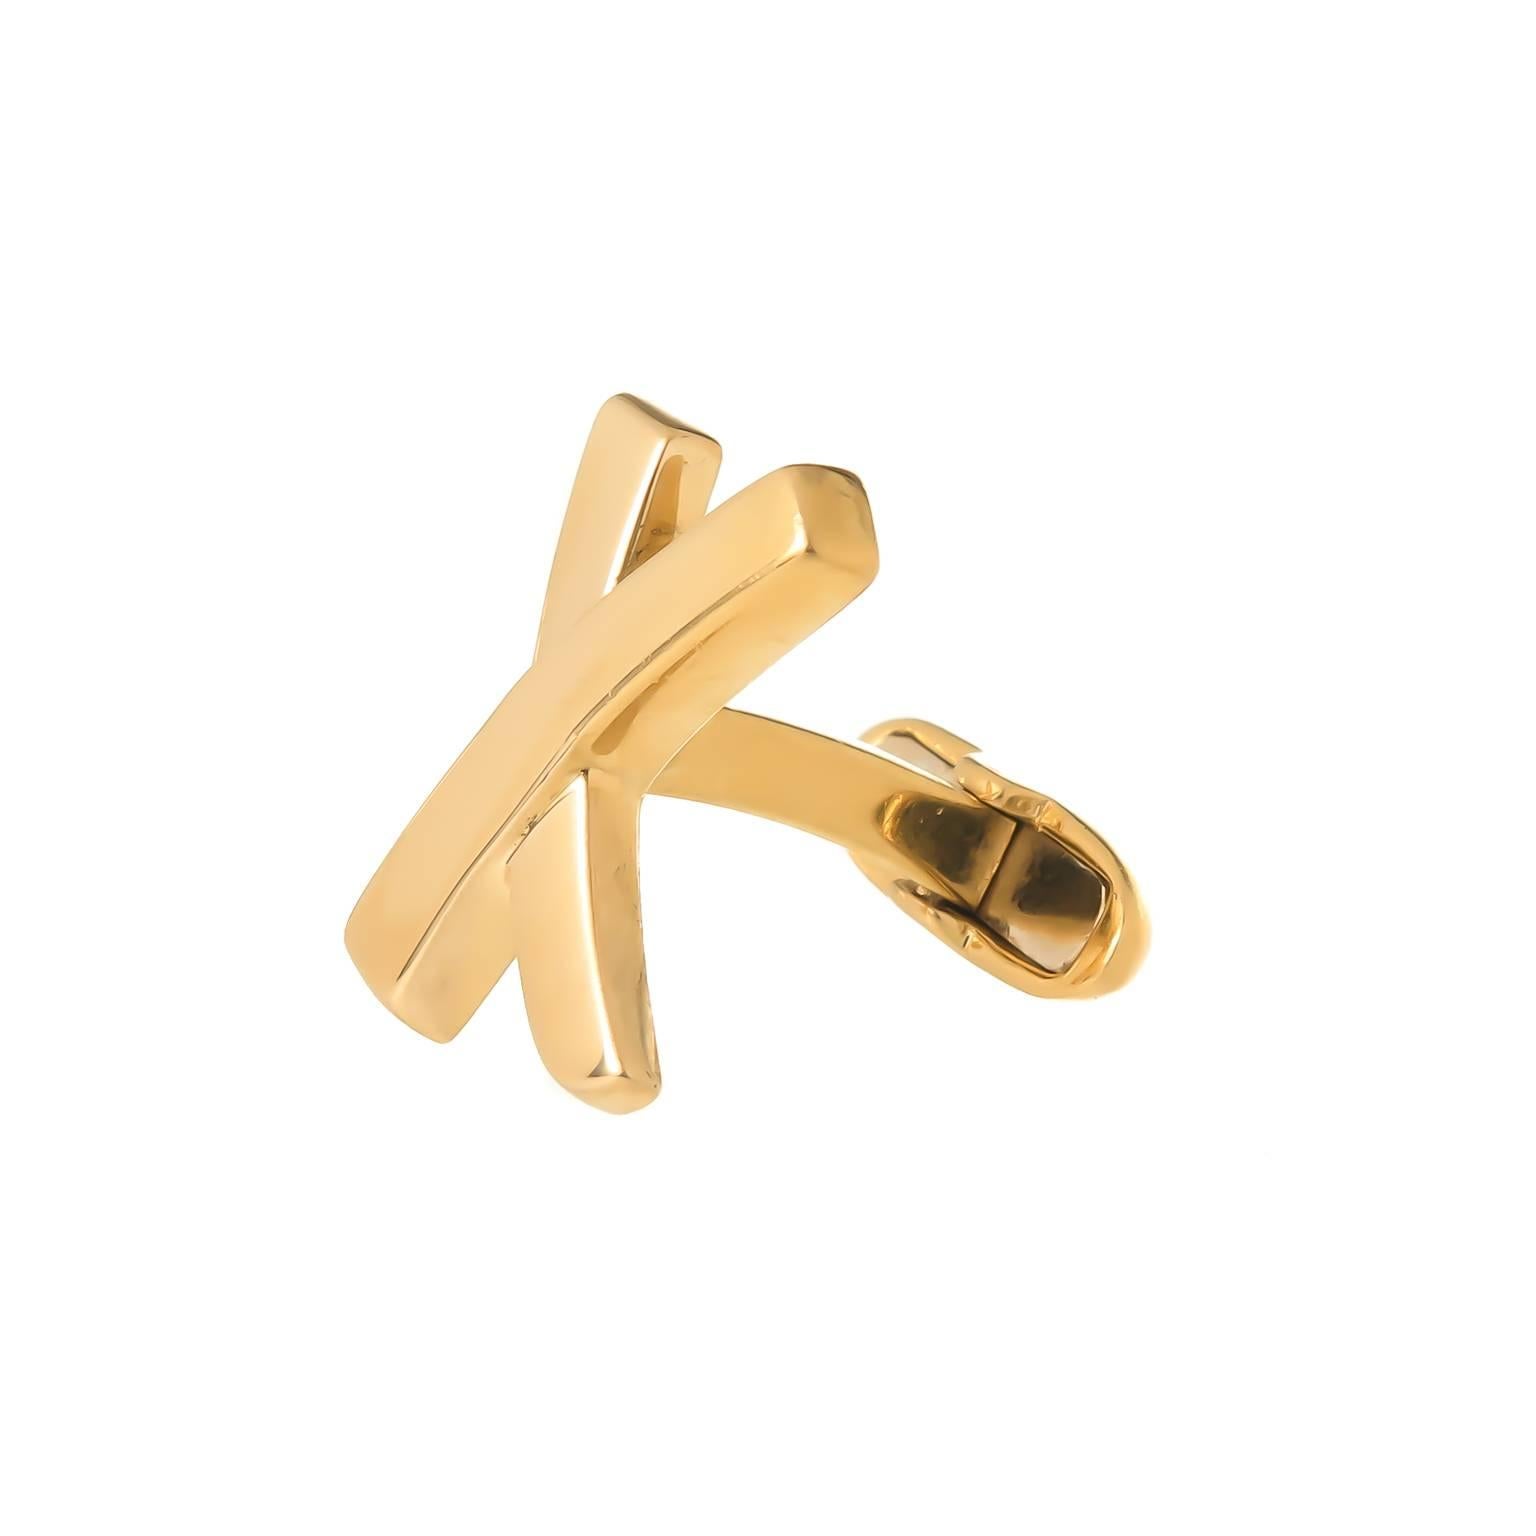 Circa 1990s Paloma Picasso for Tiffany & Company Classic X Cuff-links in 18K yellow Gold, measuring 5/8 inch. Signed and comes in the Original Tiffany Gift pouch.